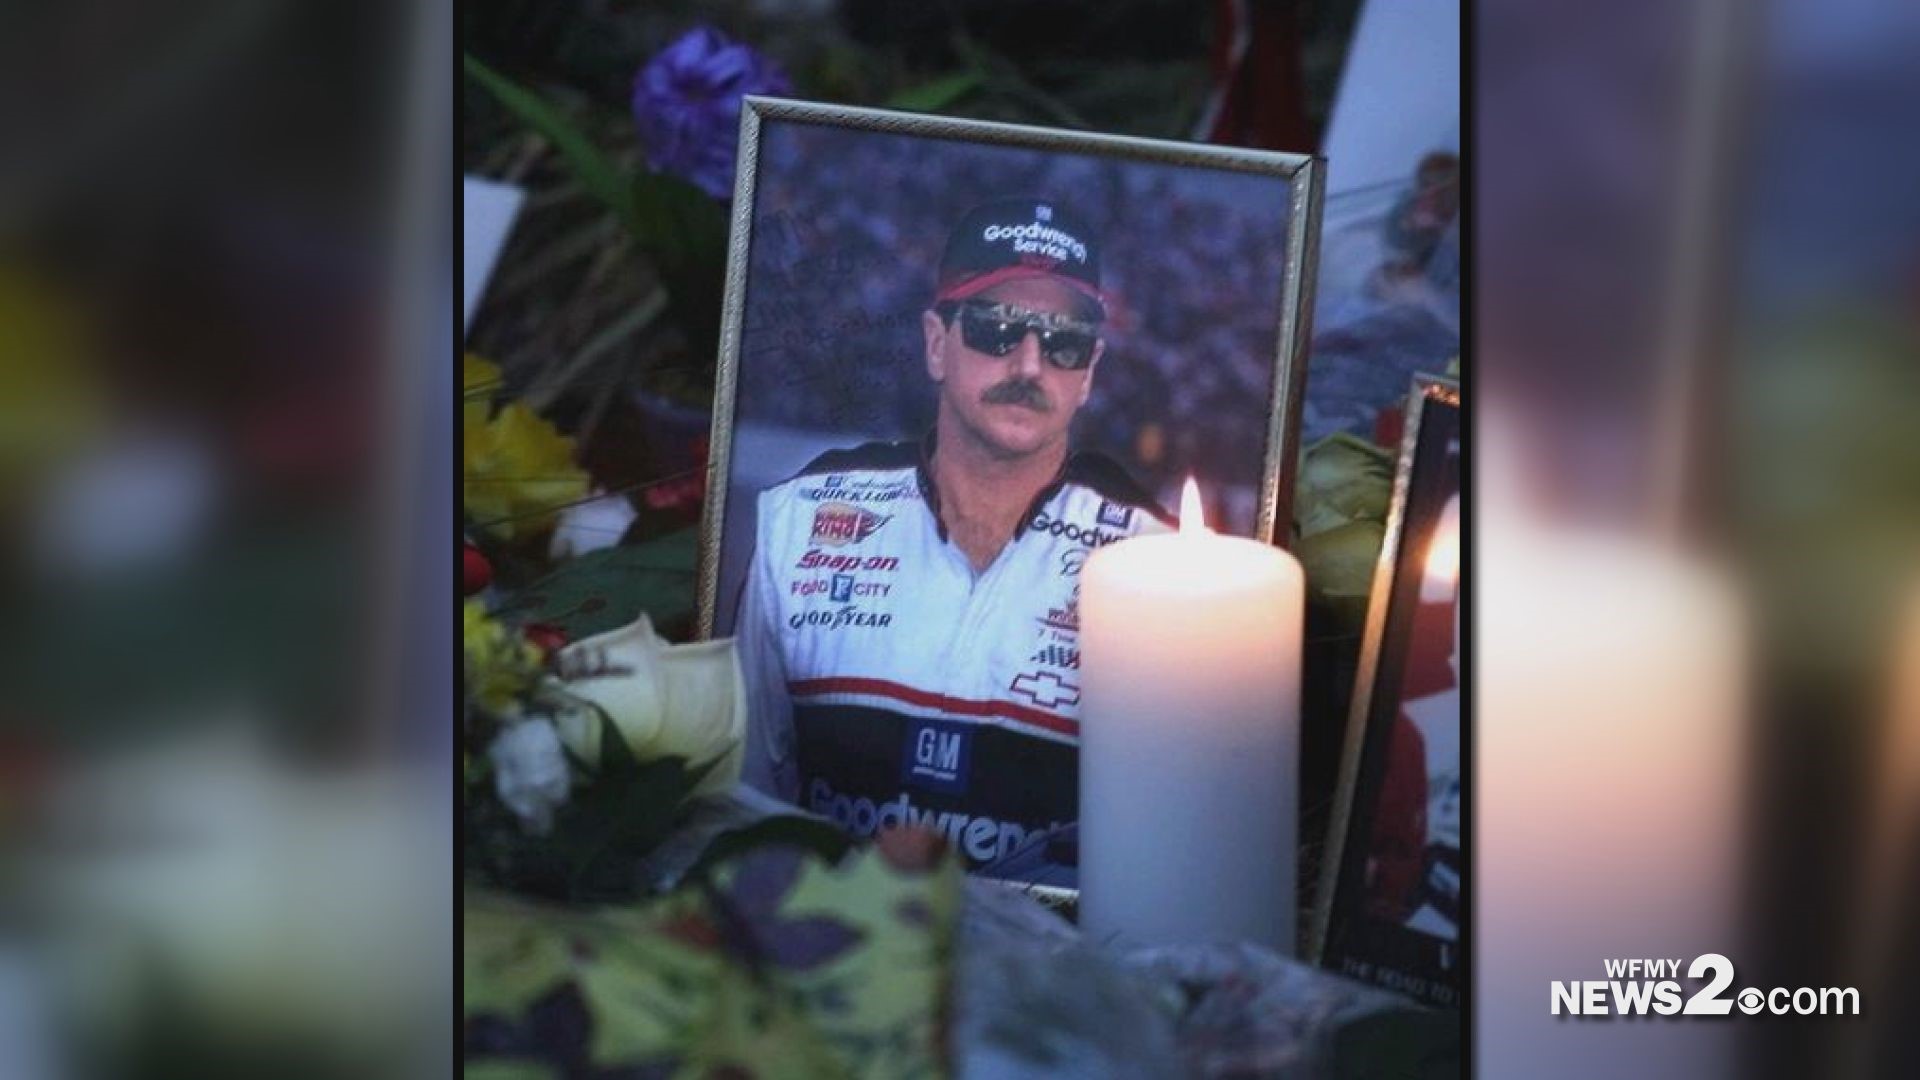 Danny "Chocolate" Myers was Earnhardt's gasman up until his death in 2001. He says, after that, racing changed forever.